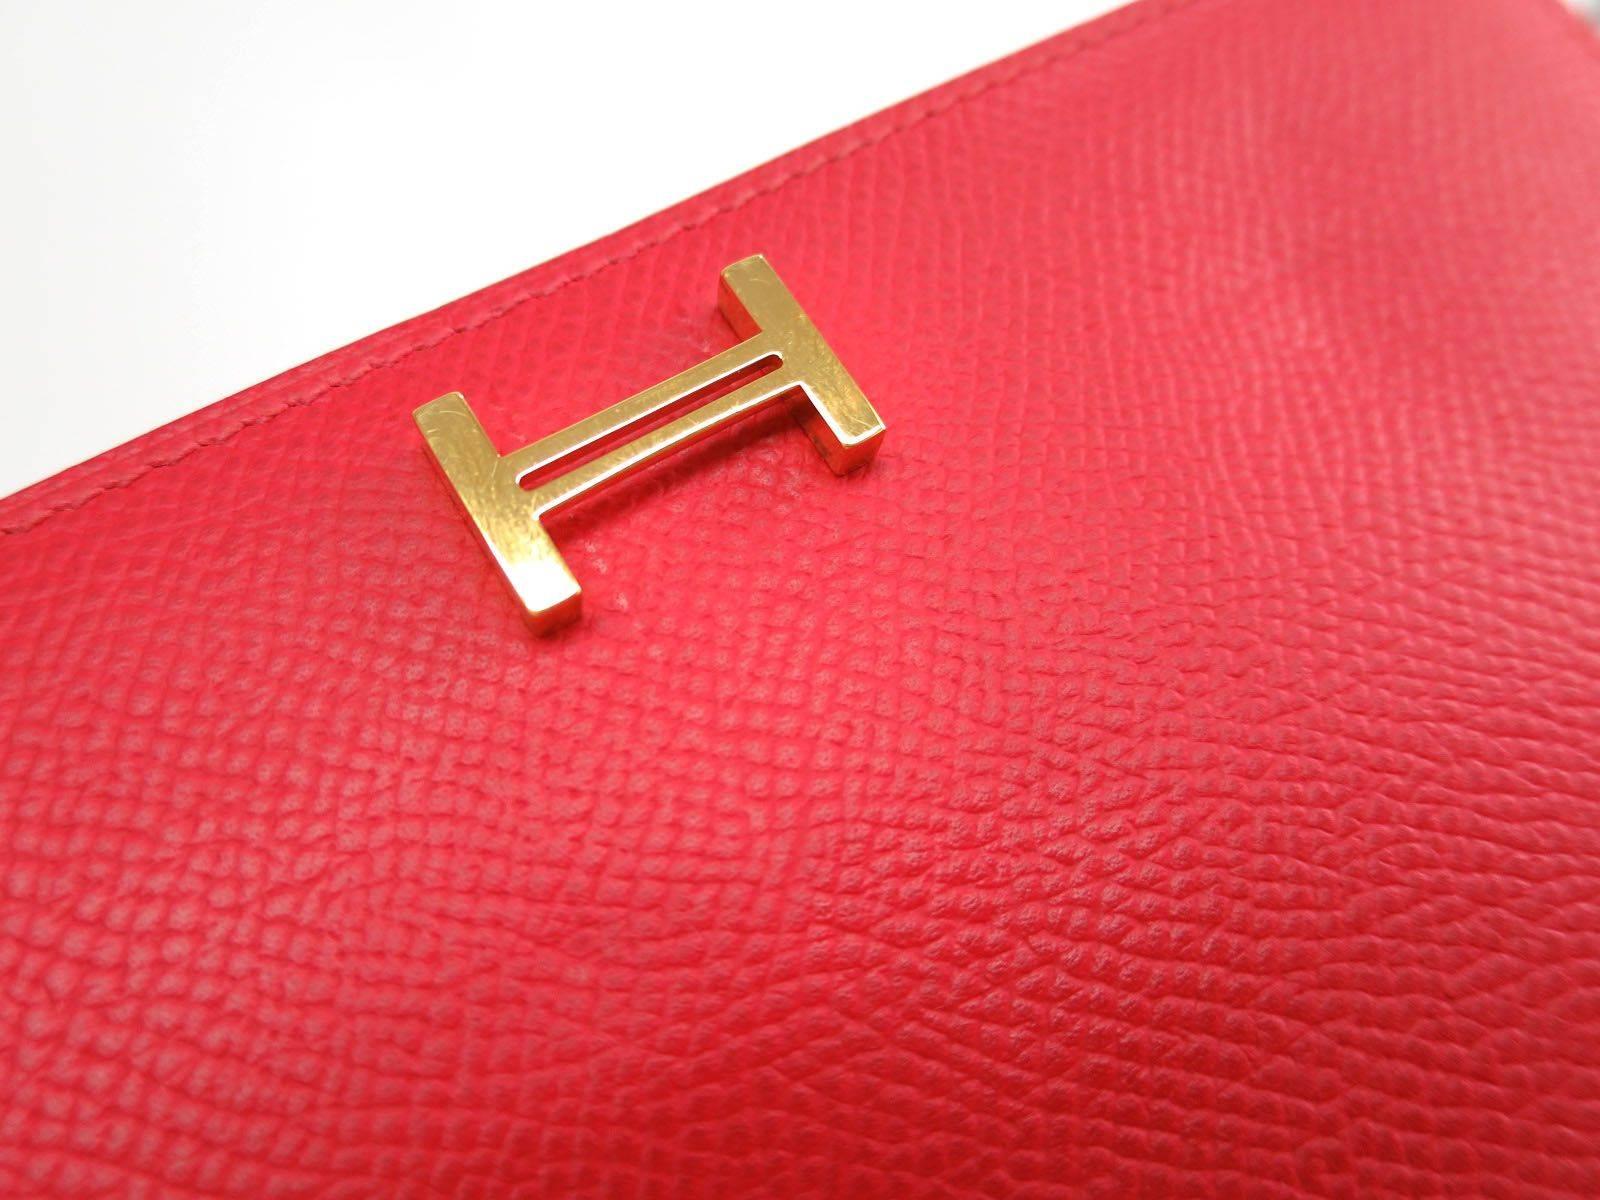 Hermes Red Leather Epsom Leather Gold 'H' Bearn Wallet in Box


Retail price $2,650
Epsom leather
Gold hardware
Belt closure
Made in France
Date code Square O (2011) 
Measures 6.9